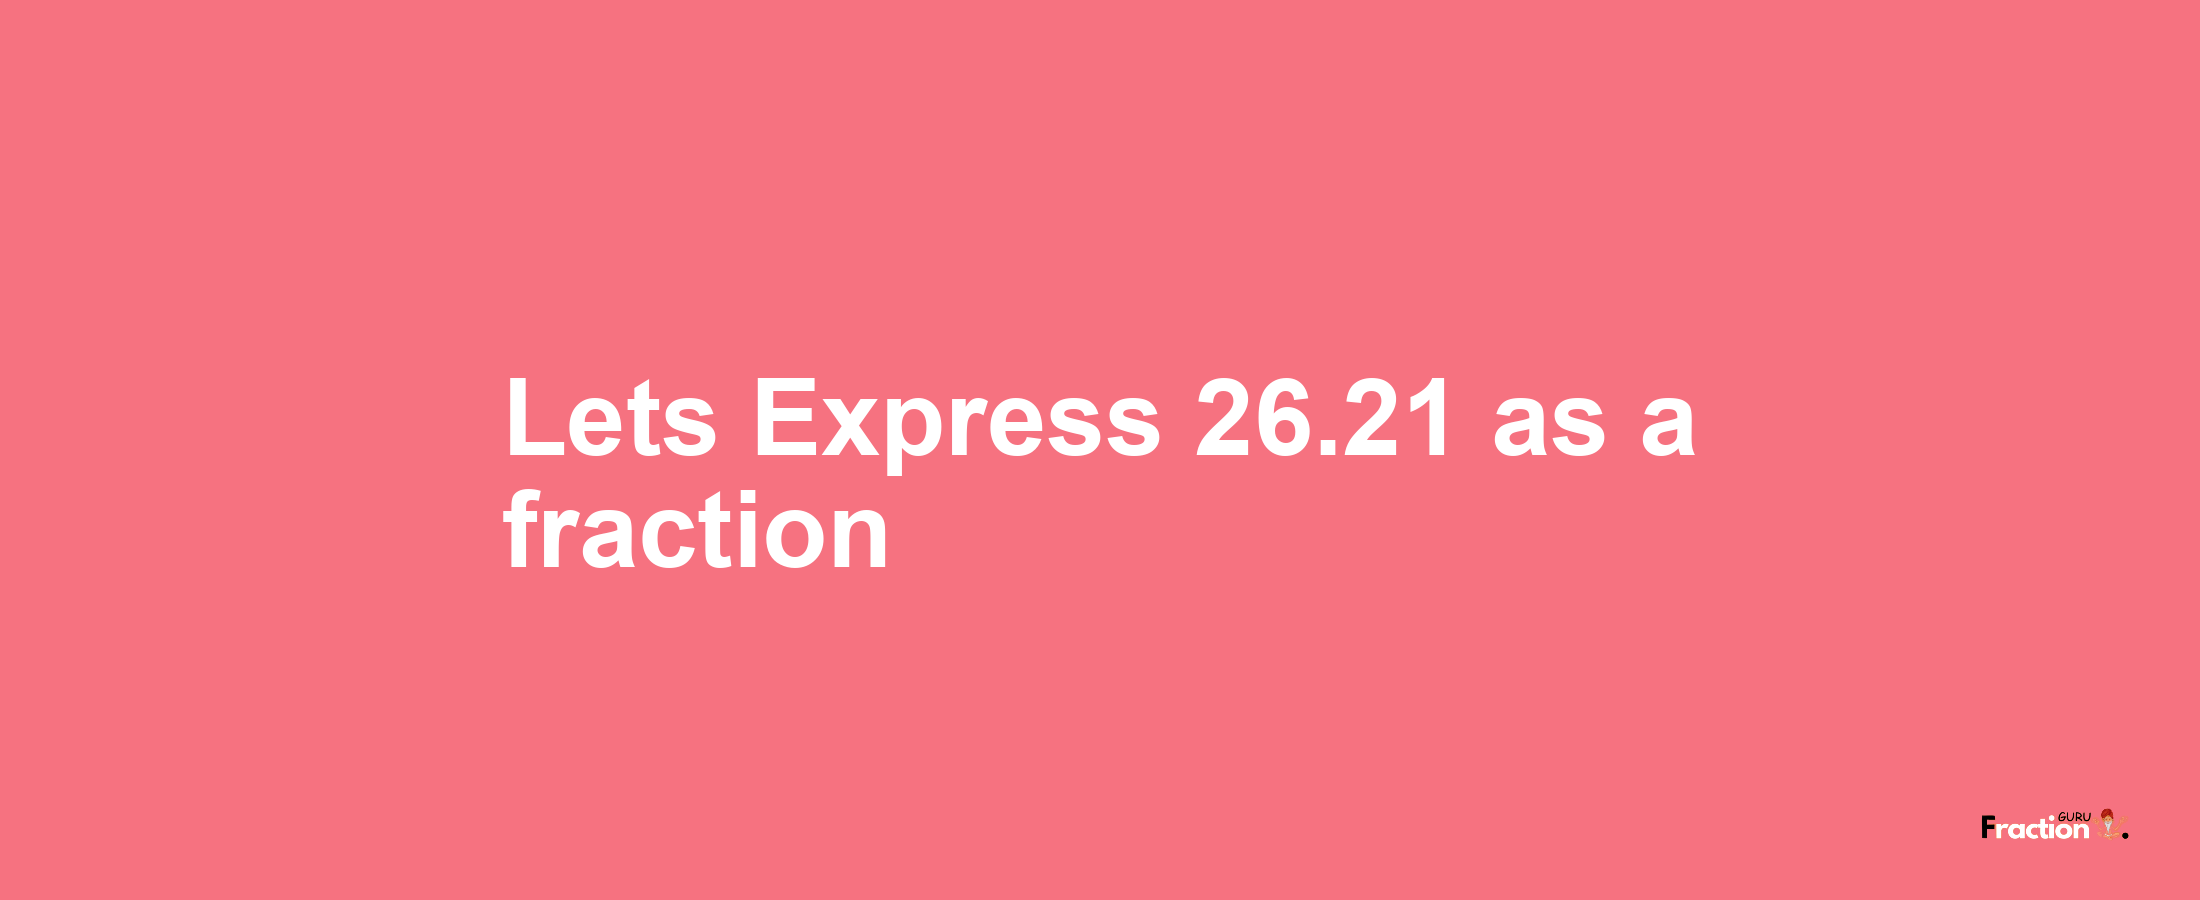 Lets Express 26.21 as afraction